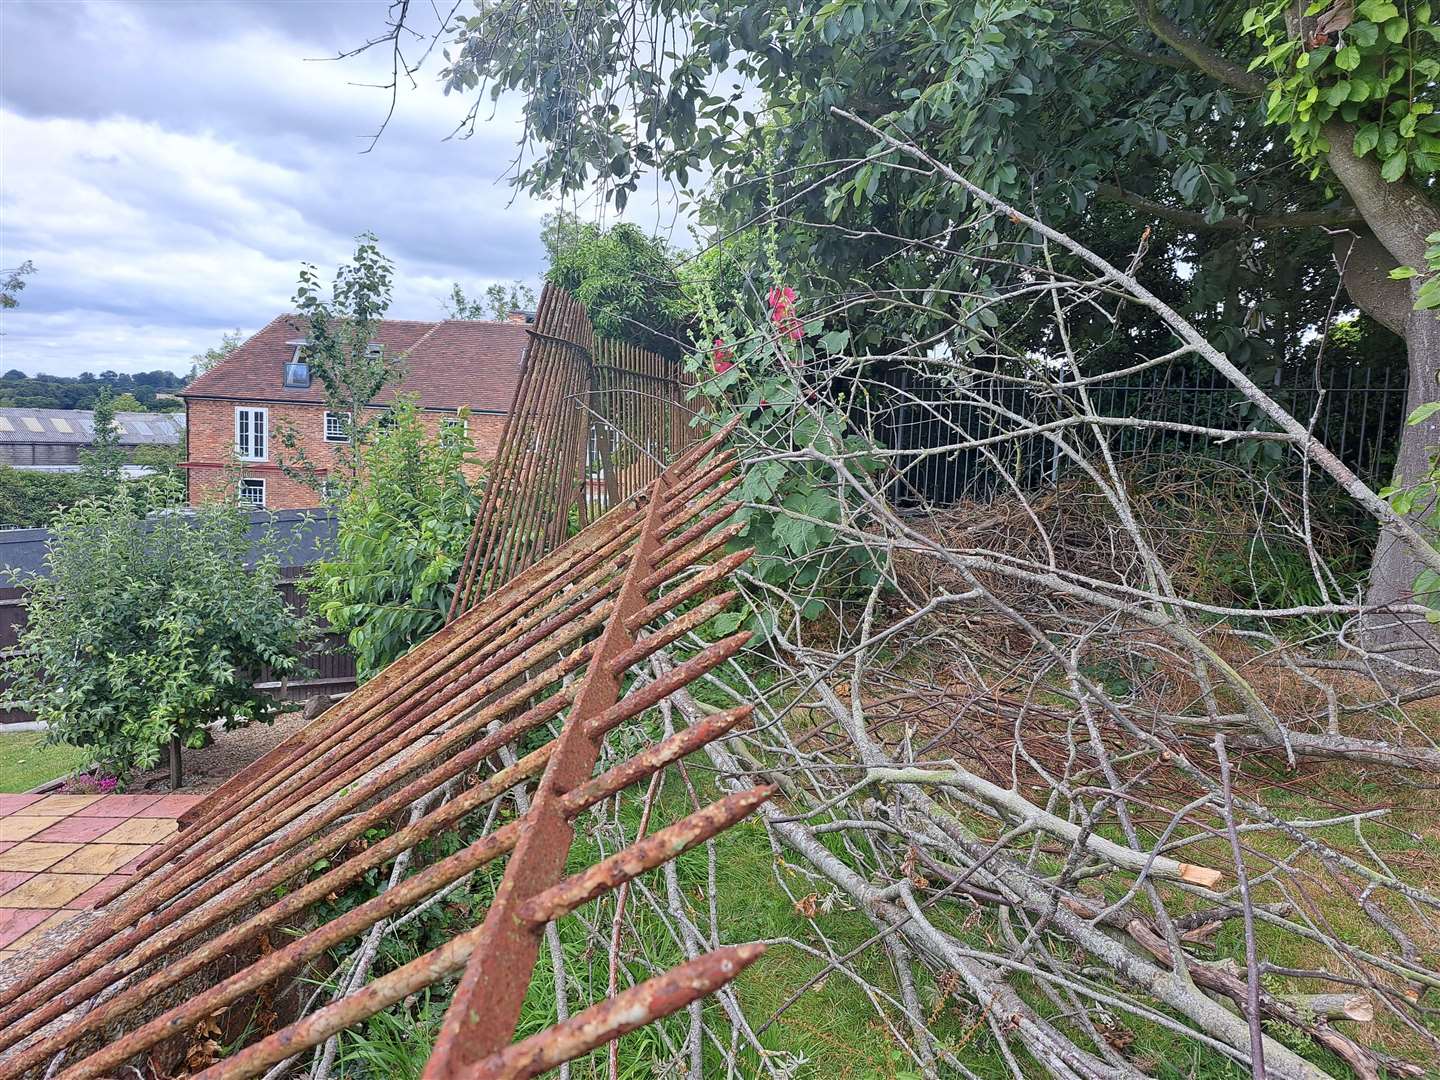 Fencing was damaged as Storm Eunice hit in February